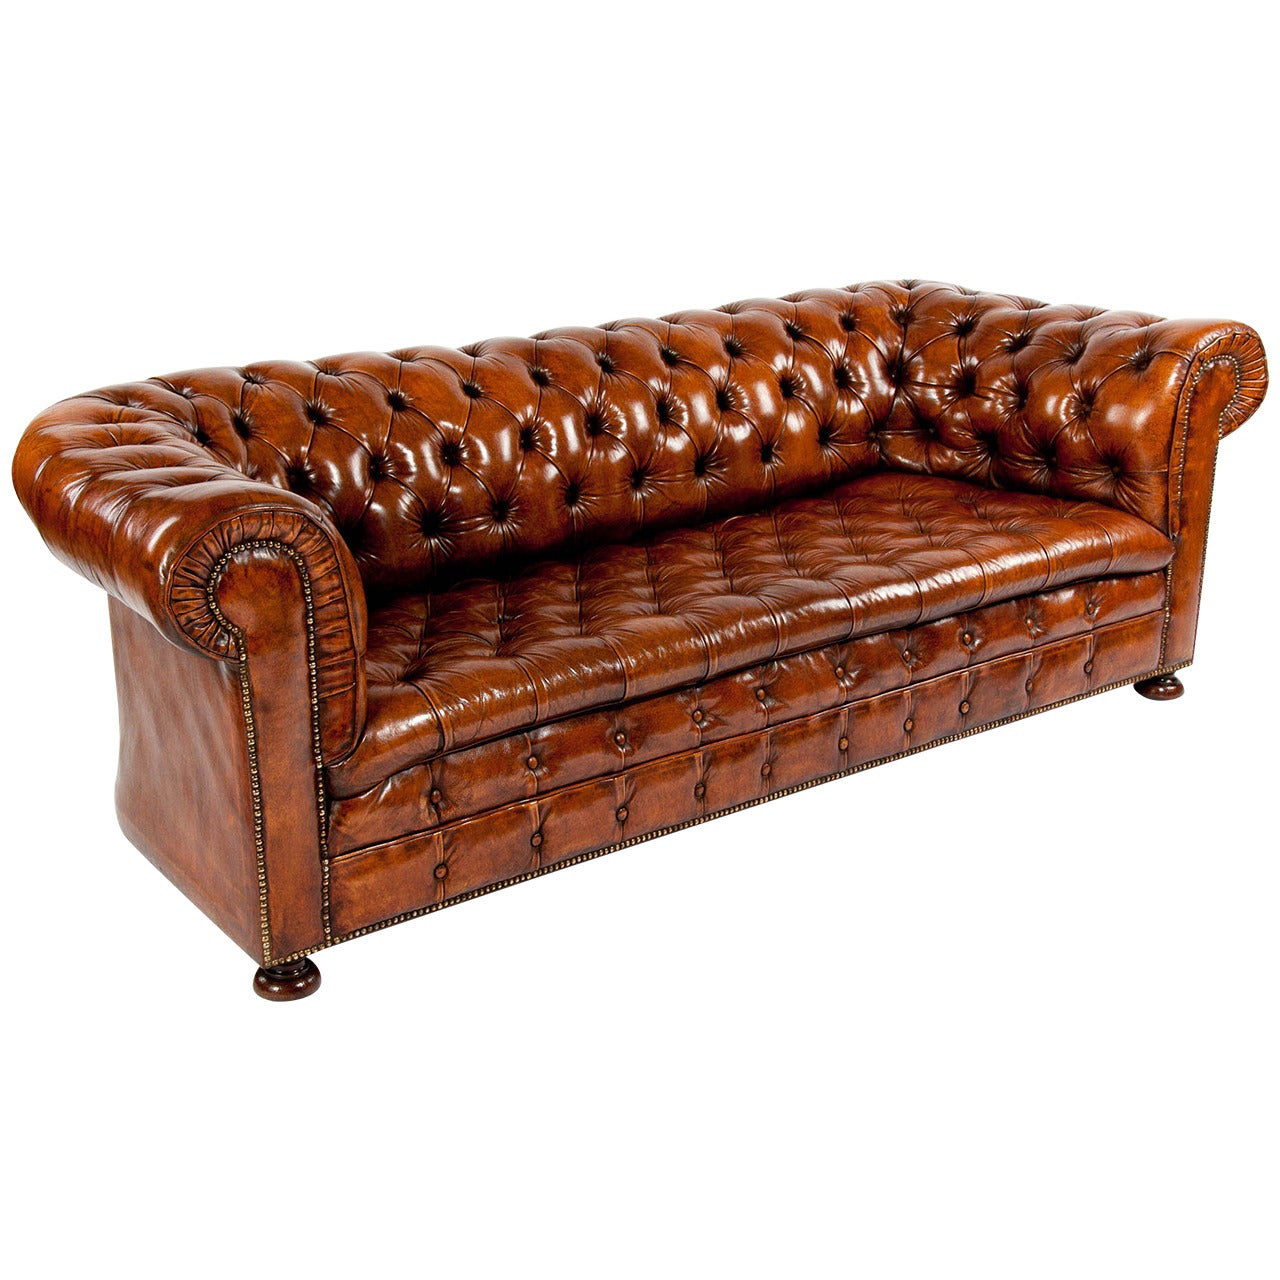 Quality Antique Leather Chesterfield Sofa